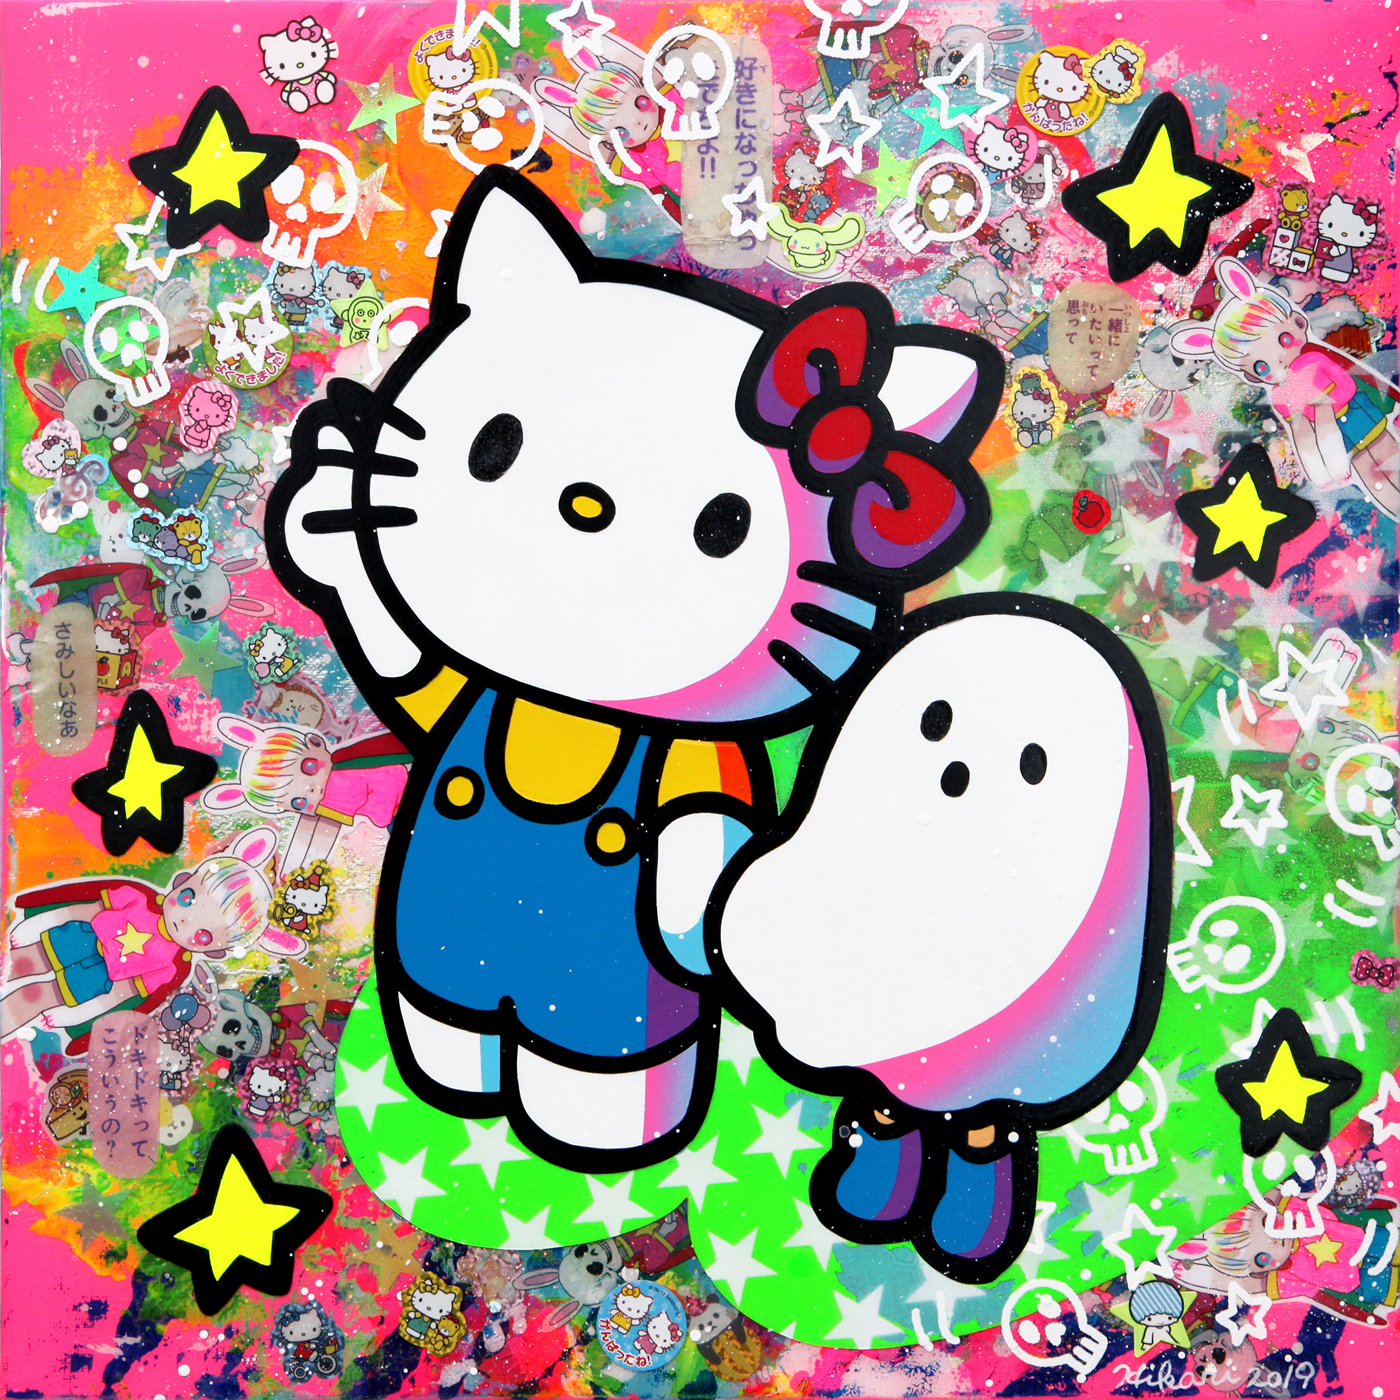 Hello Kitty's 45th Anniversary Group Show